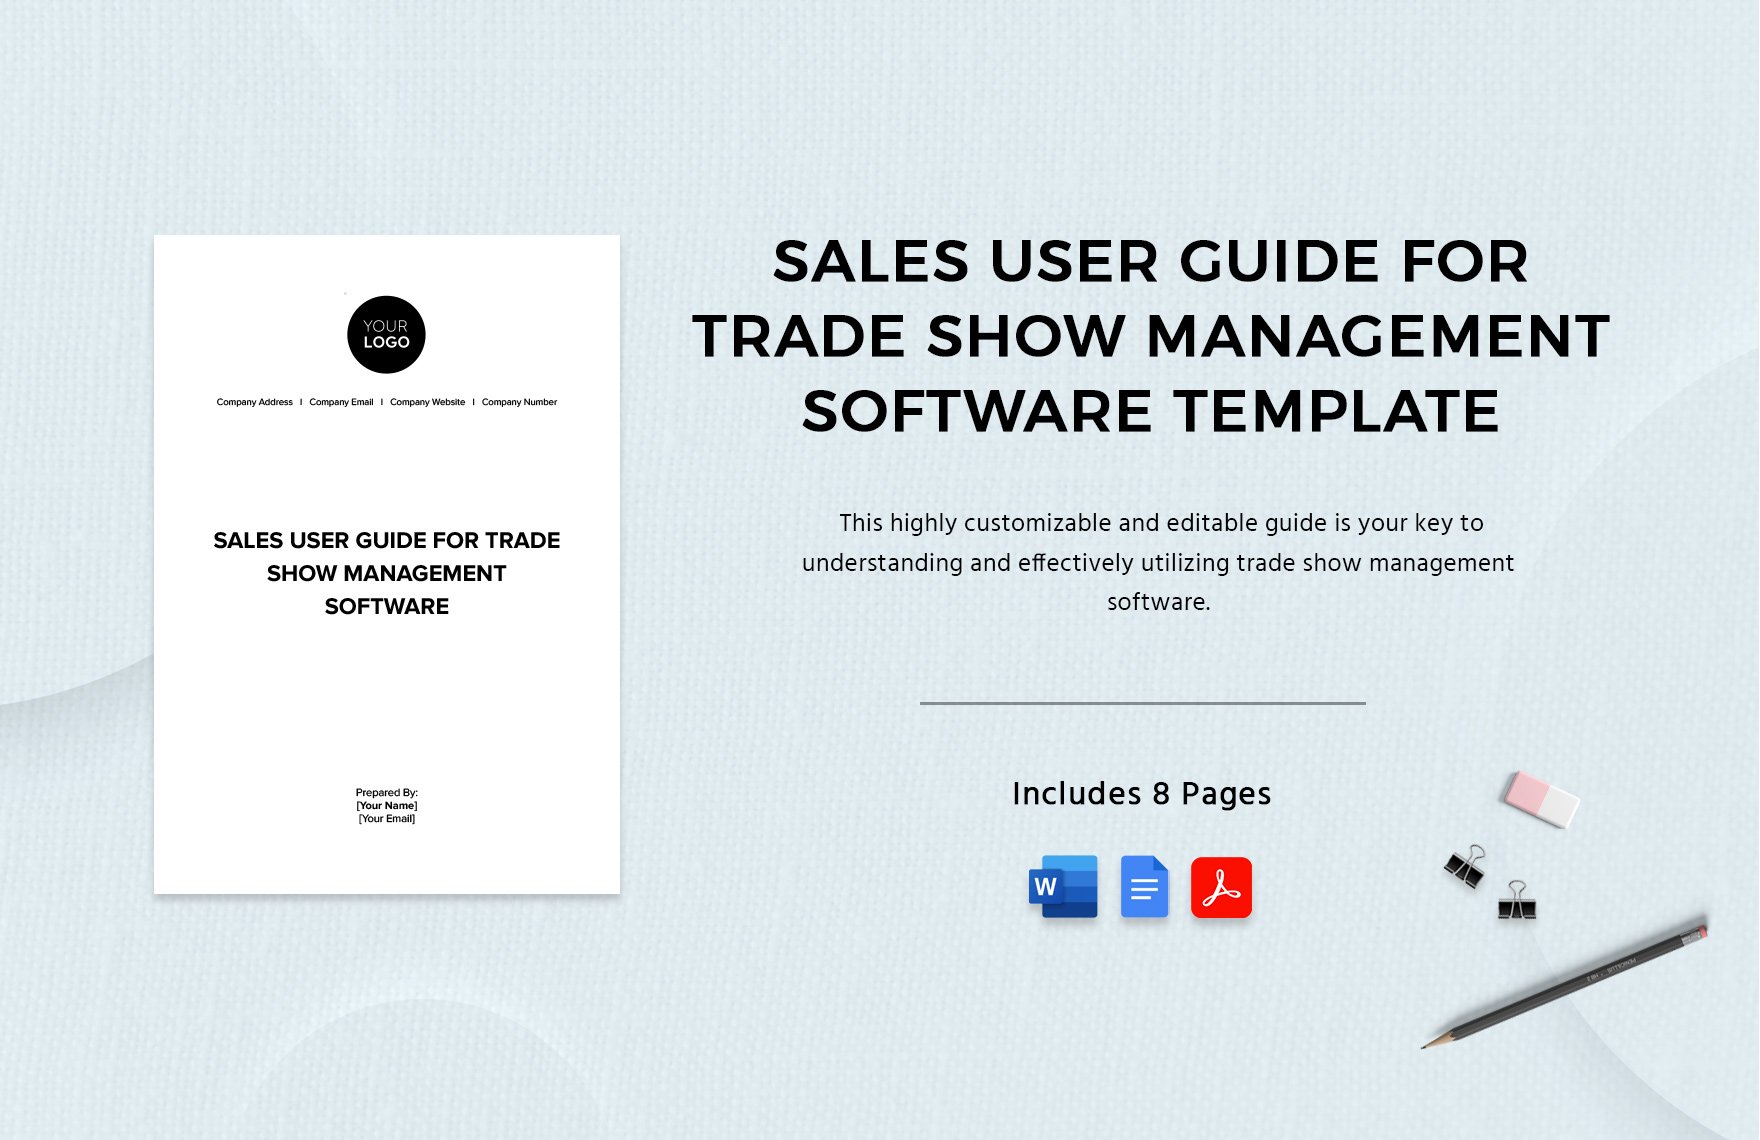 Sales User Guide for Trade Show Management Software Template